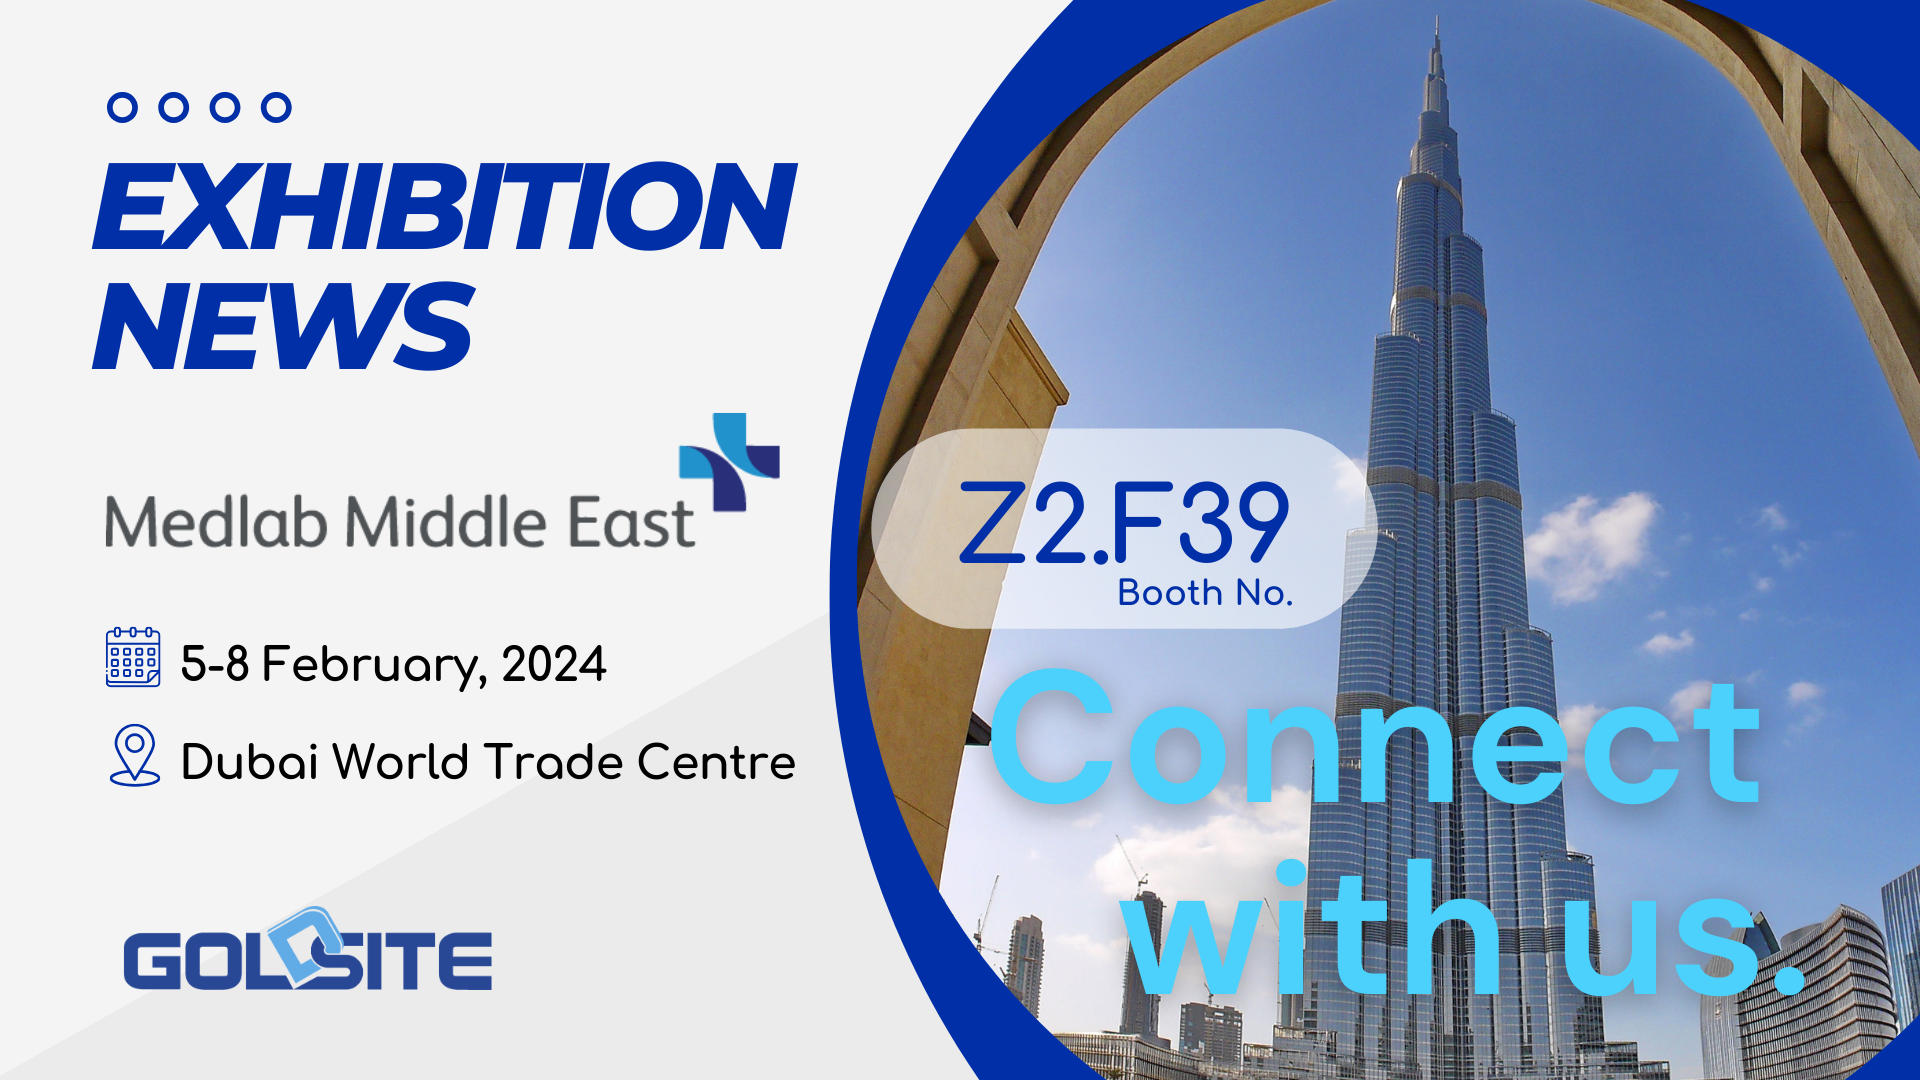 Upcoming Events: Goldsite To Exhibit at MEDLAB MIDDLE EAST 2024